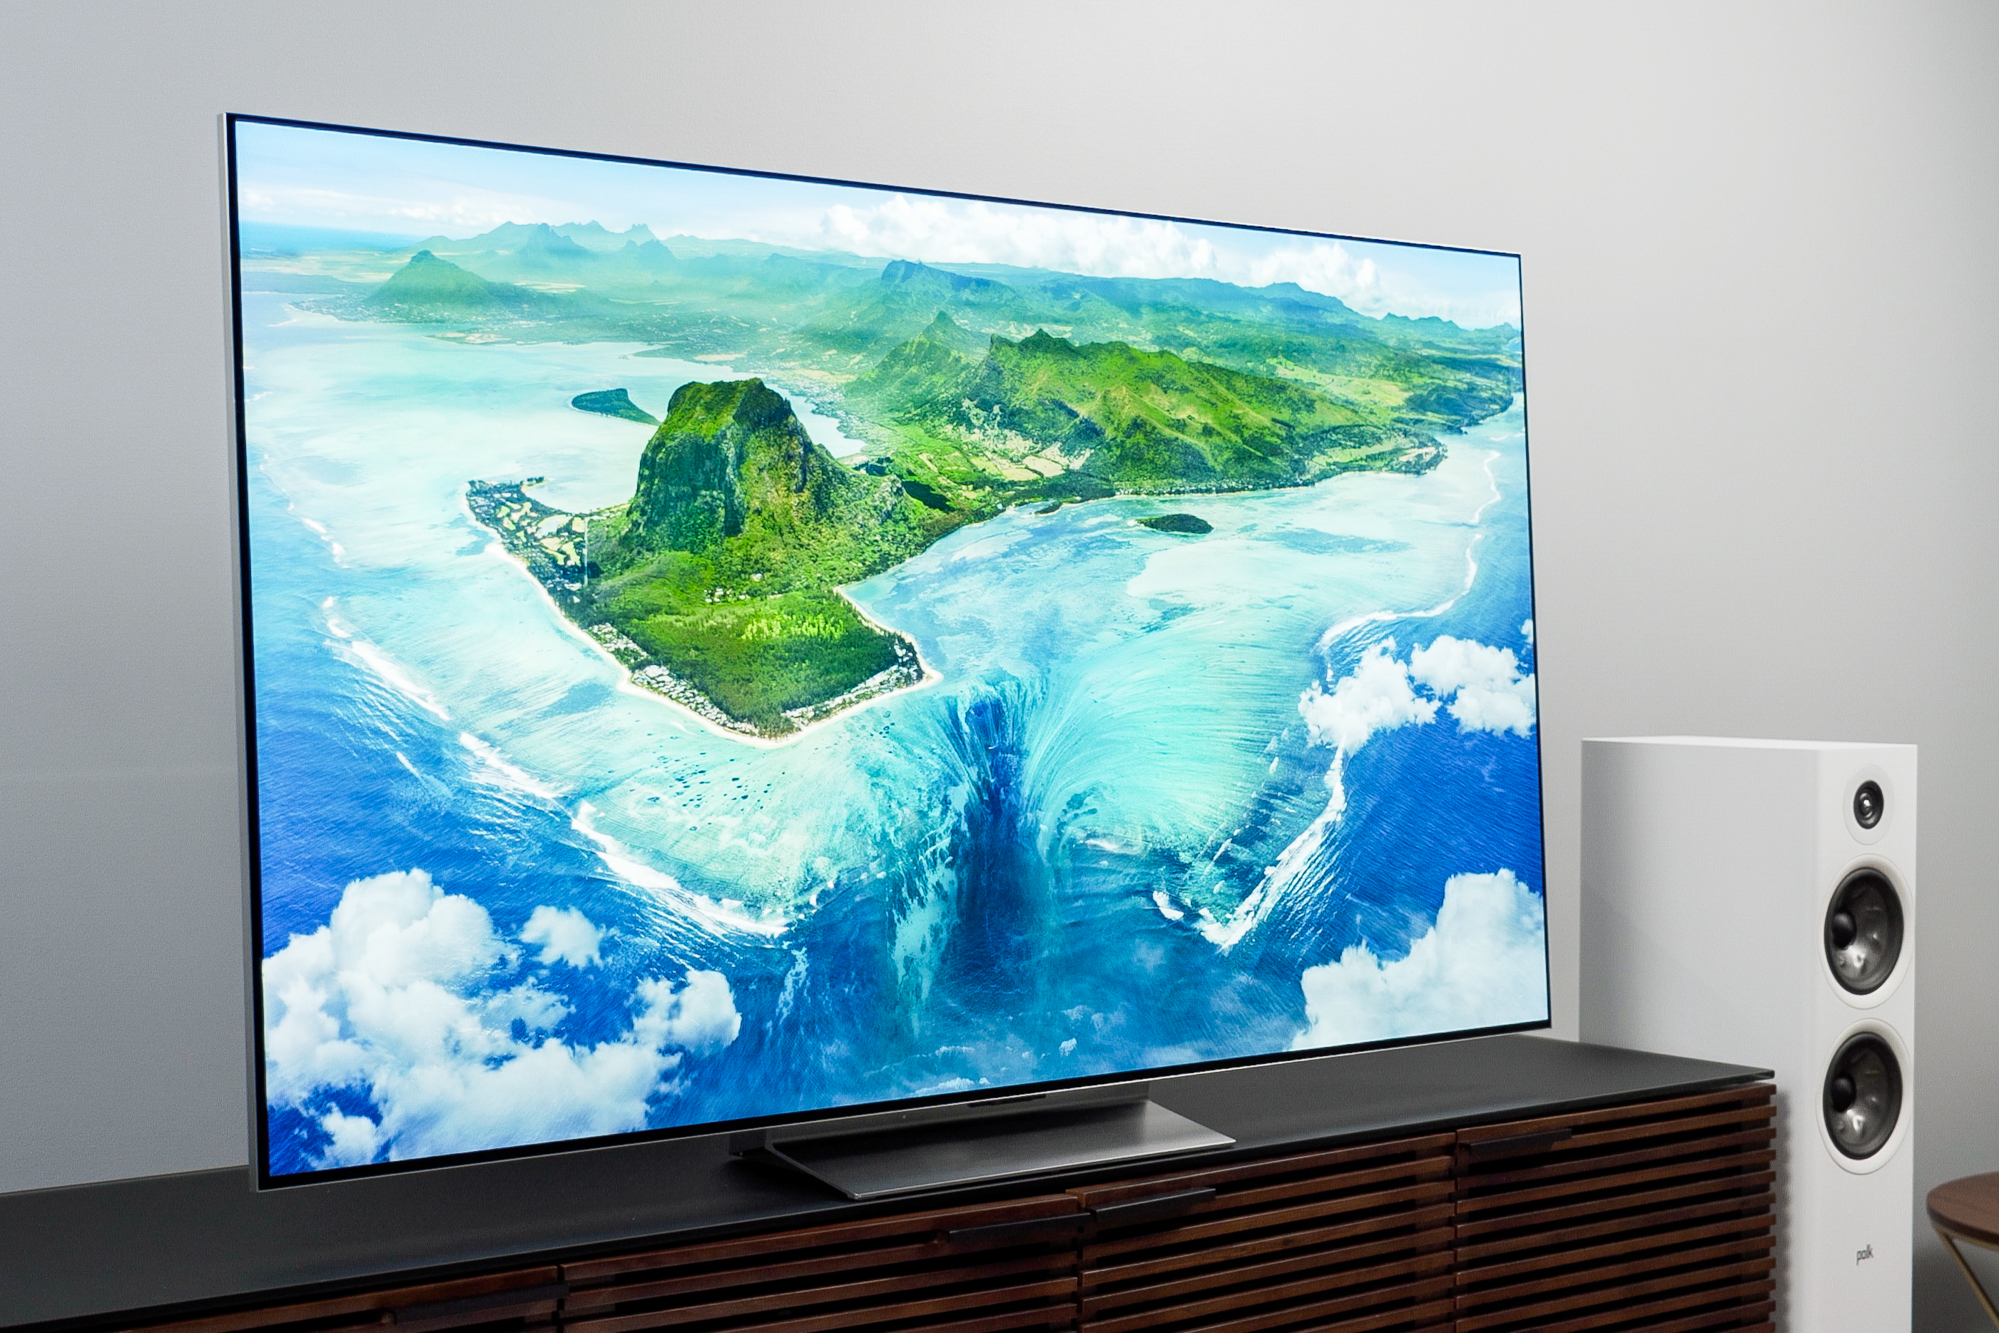 Prosecute End table Footpad LG G2 OLED TV review: a truly elevated OLED TV | Digital Trends